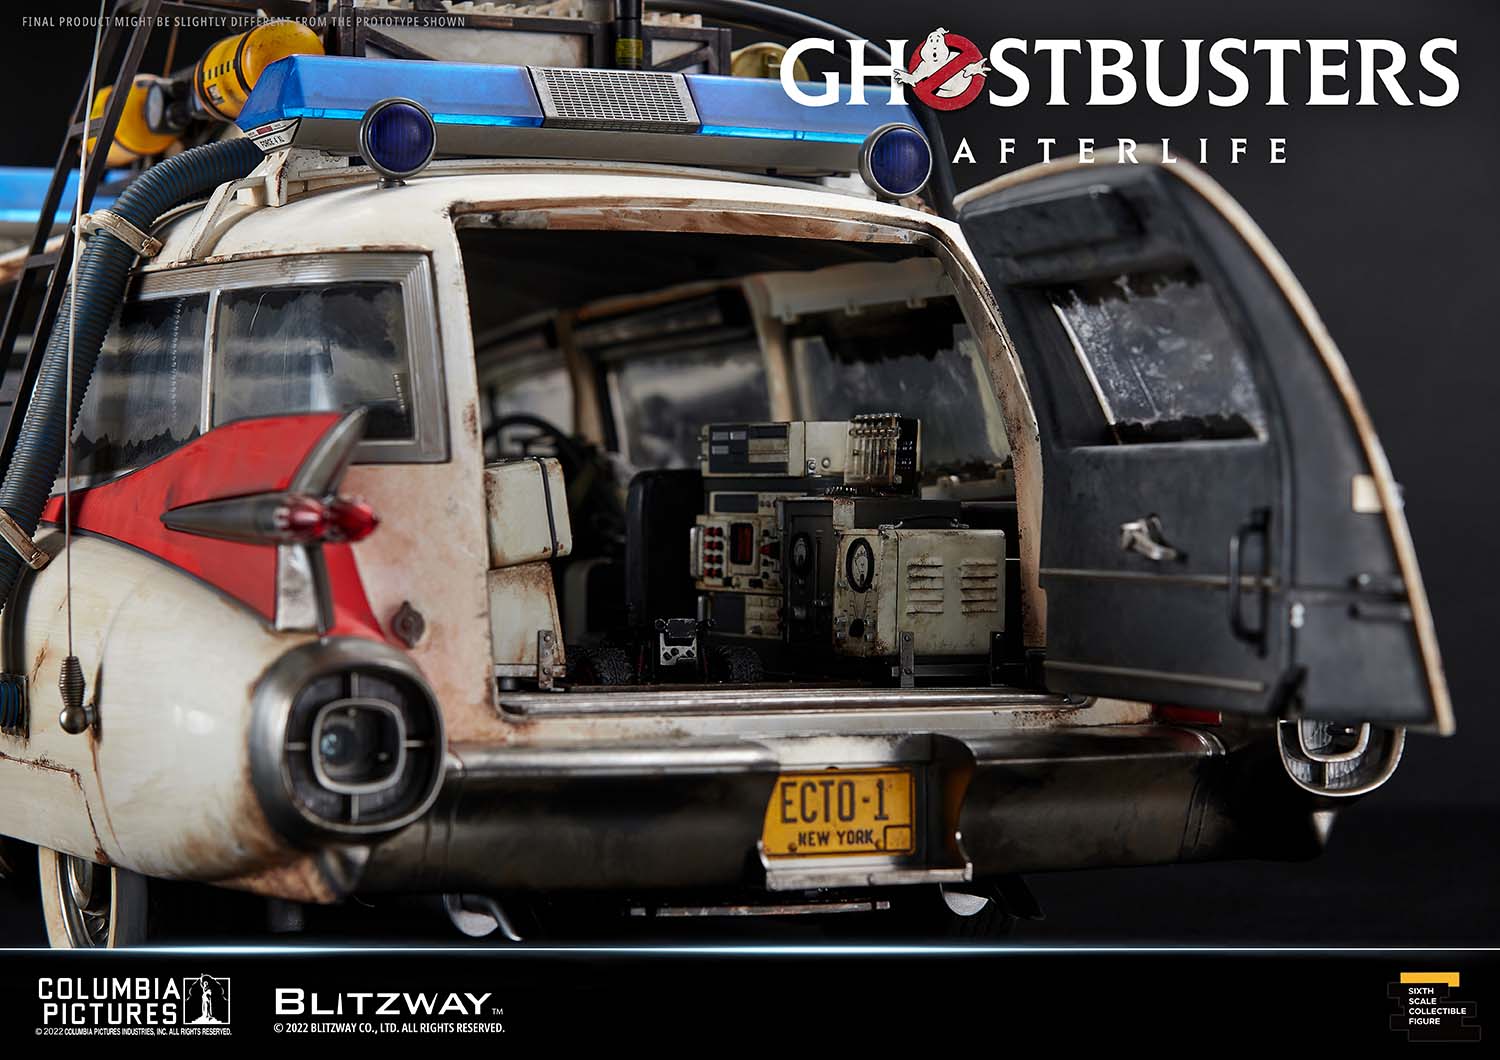 Ecto-1 (1:6 Scale Vehicle)- Ghostbusters: Afterlife